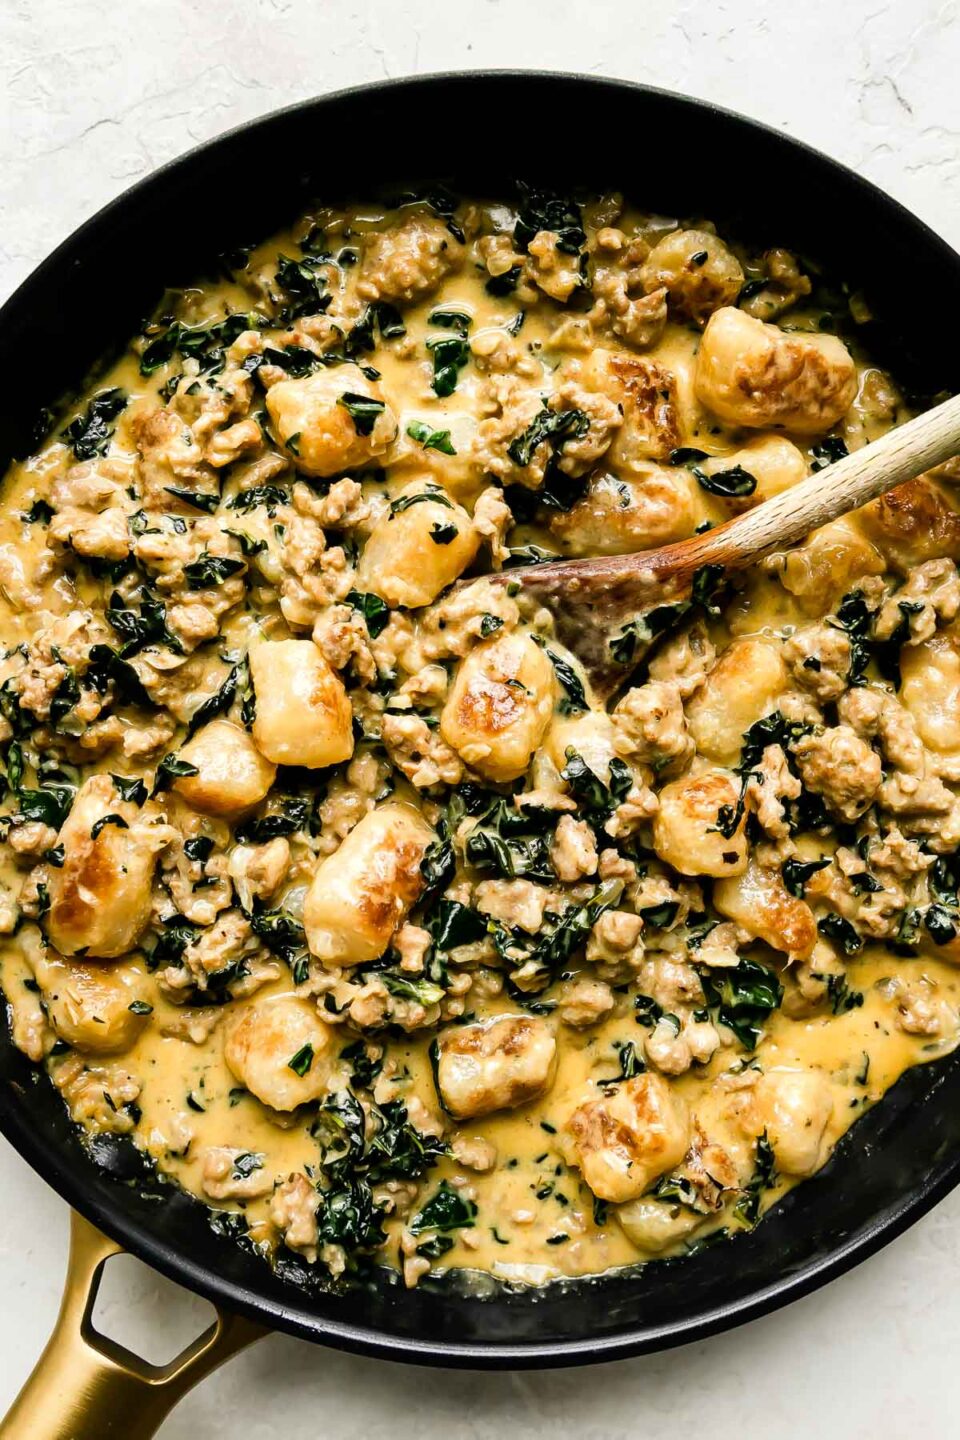 Cauliflower gnocchi skillet fills a large black nonstick skillet that sits atop a creamy white textured surface. A wooden spoon rests inside of the skillet for stirring.